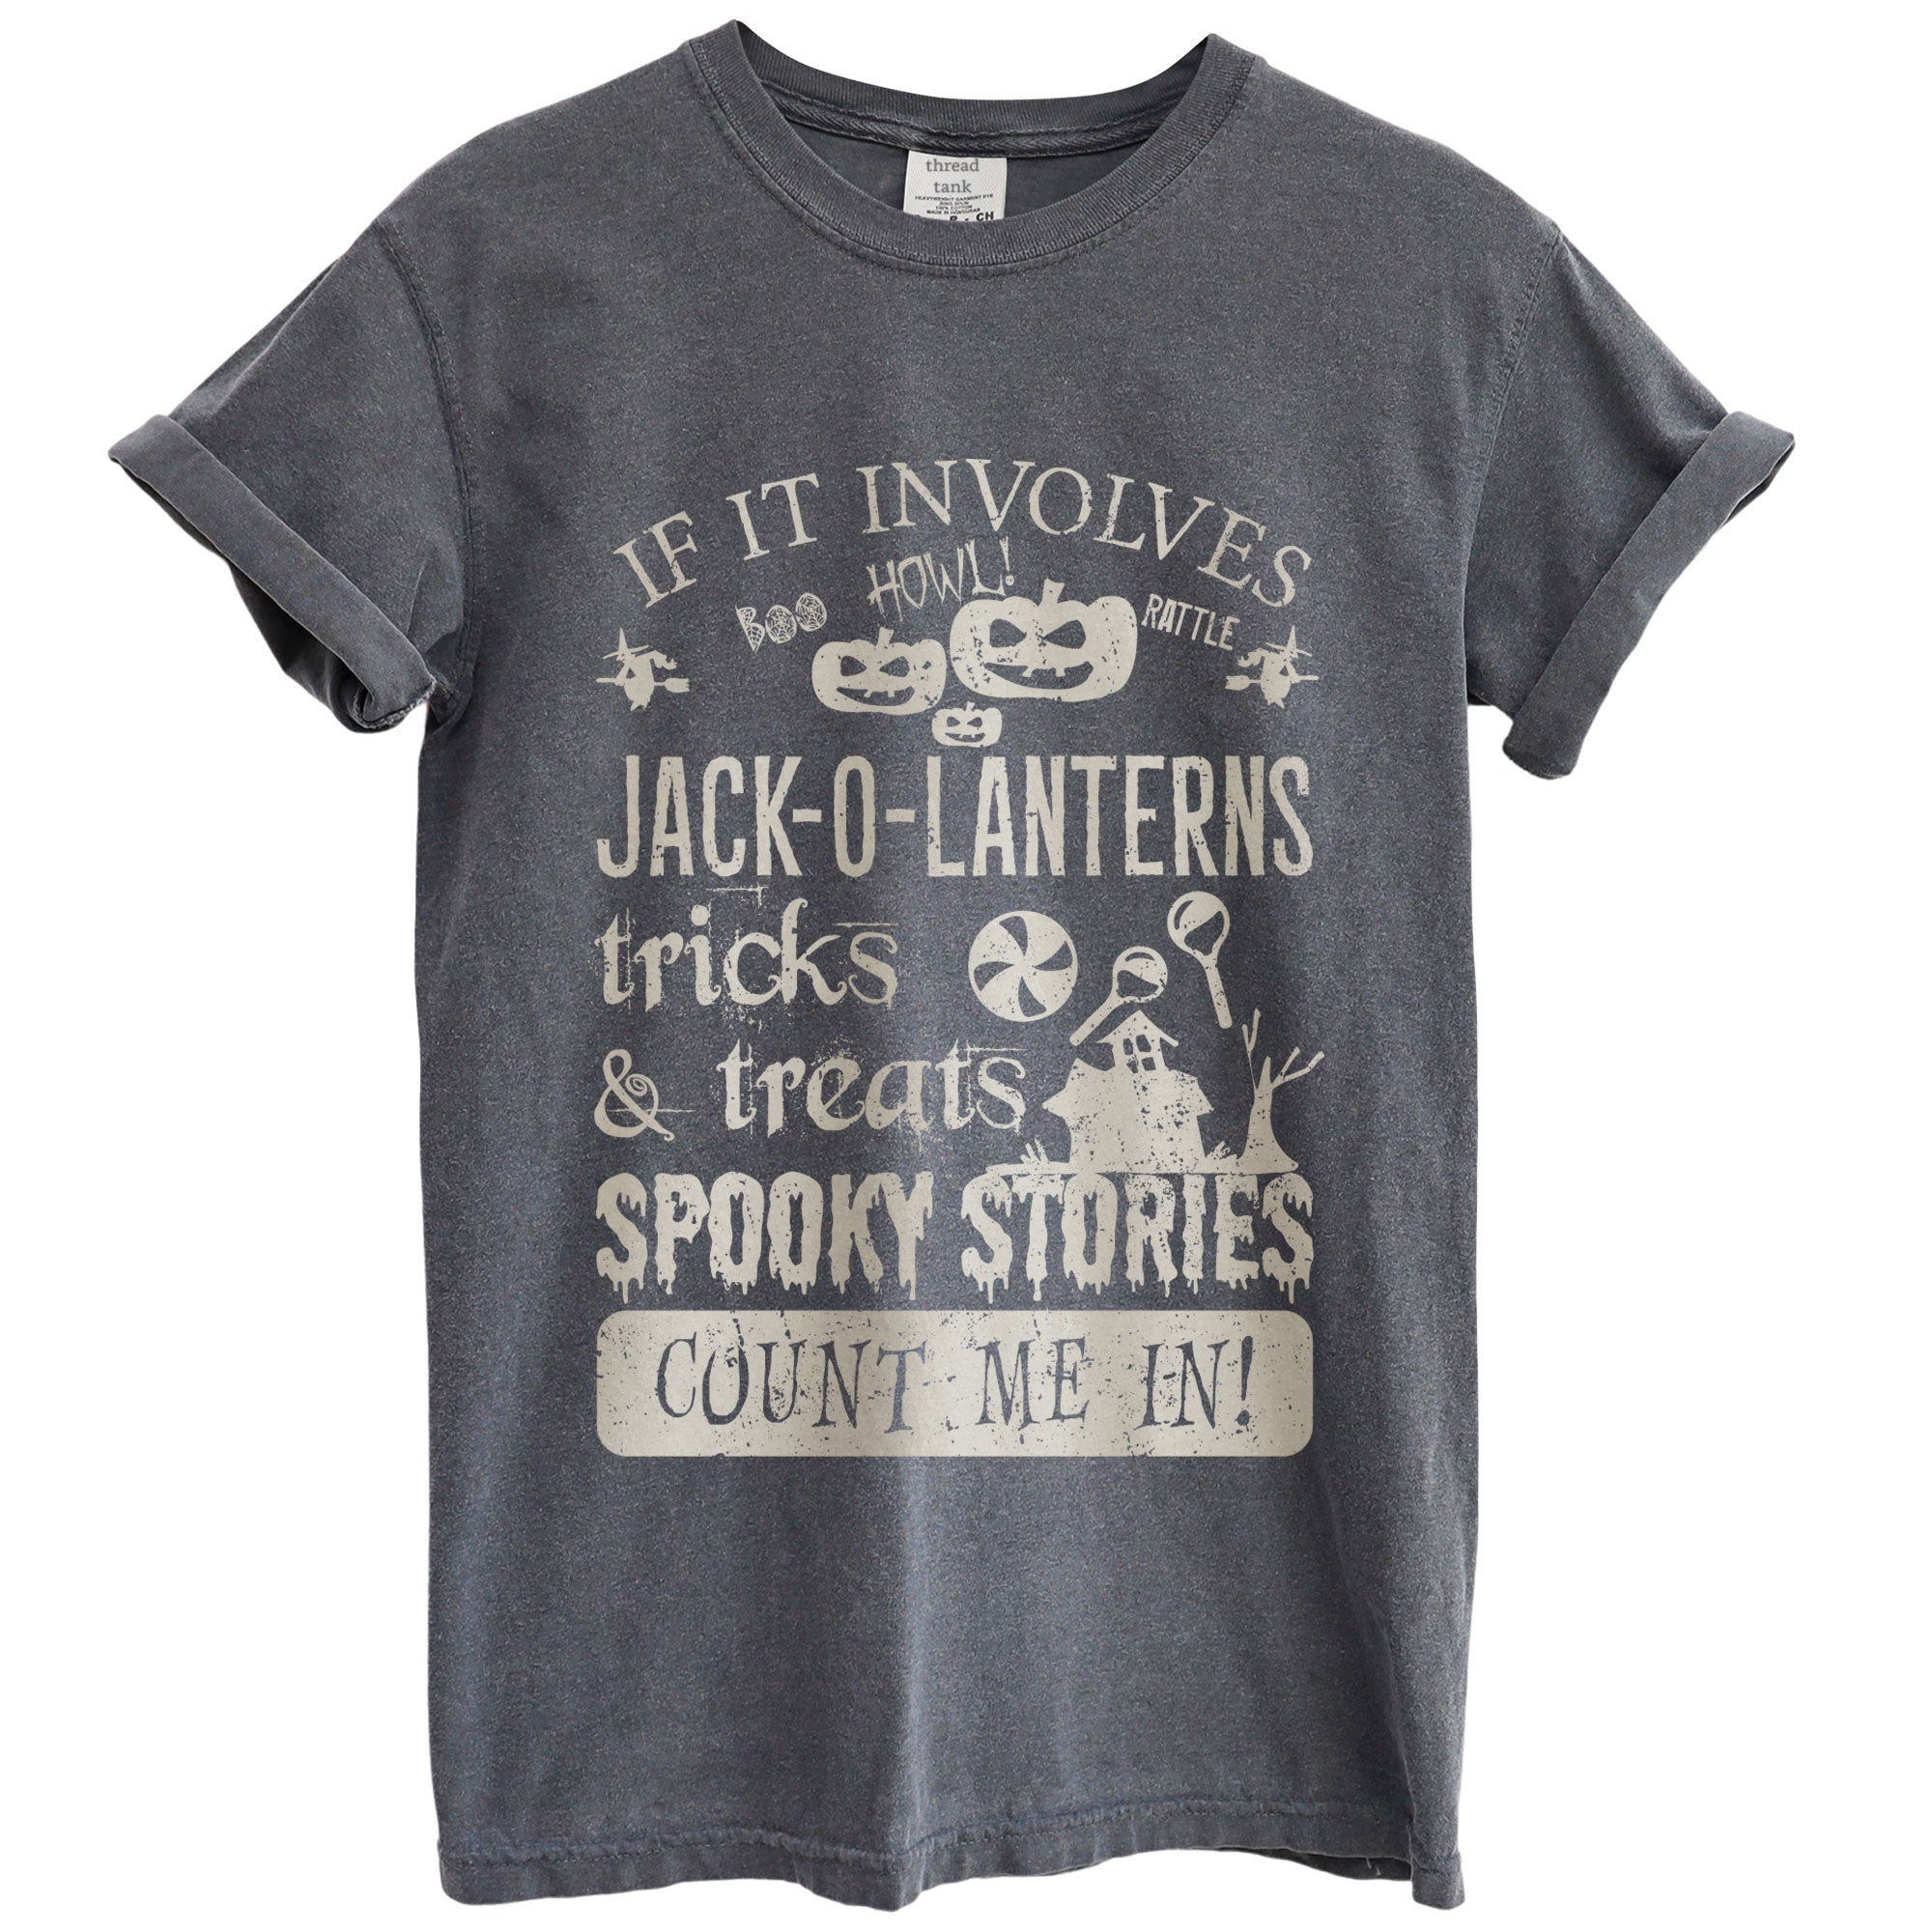 jack o lantern spooky stories count me in oversized garment dyed shirt